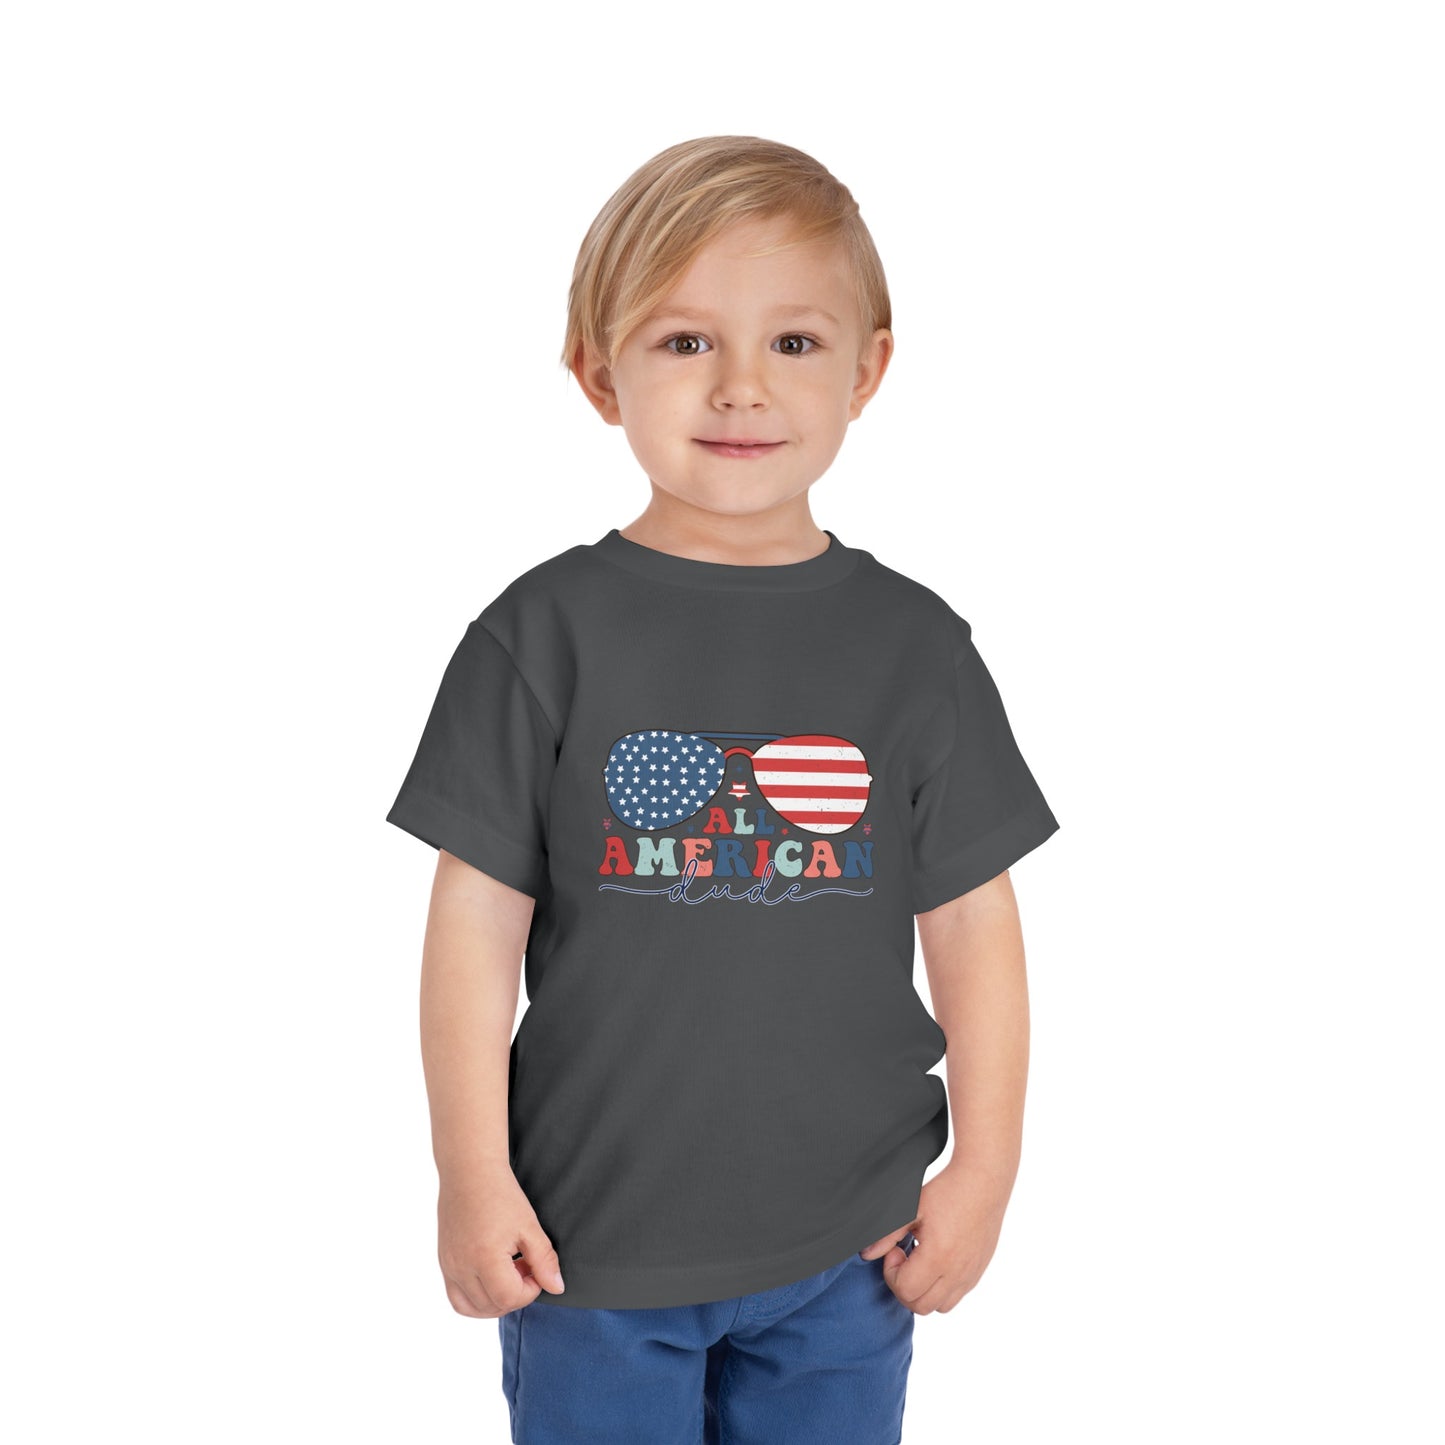 All American Dude Toddler Short Sleeve Tee